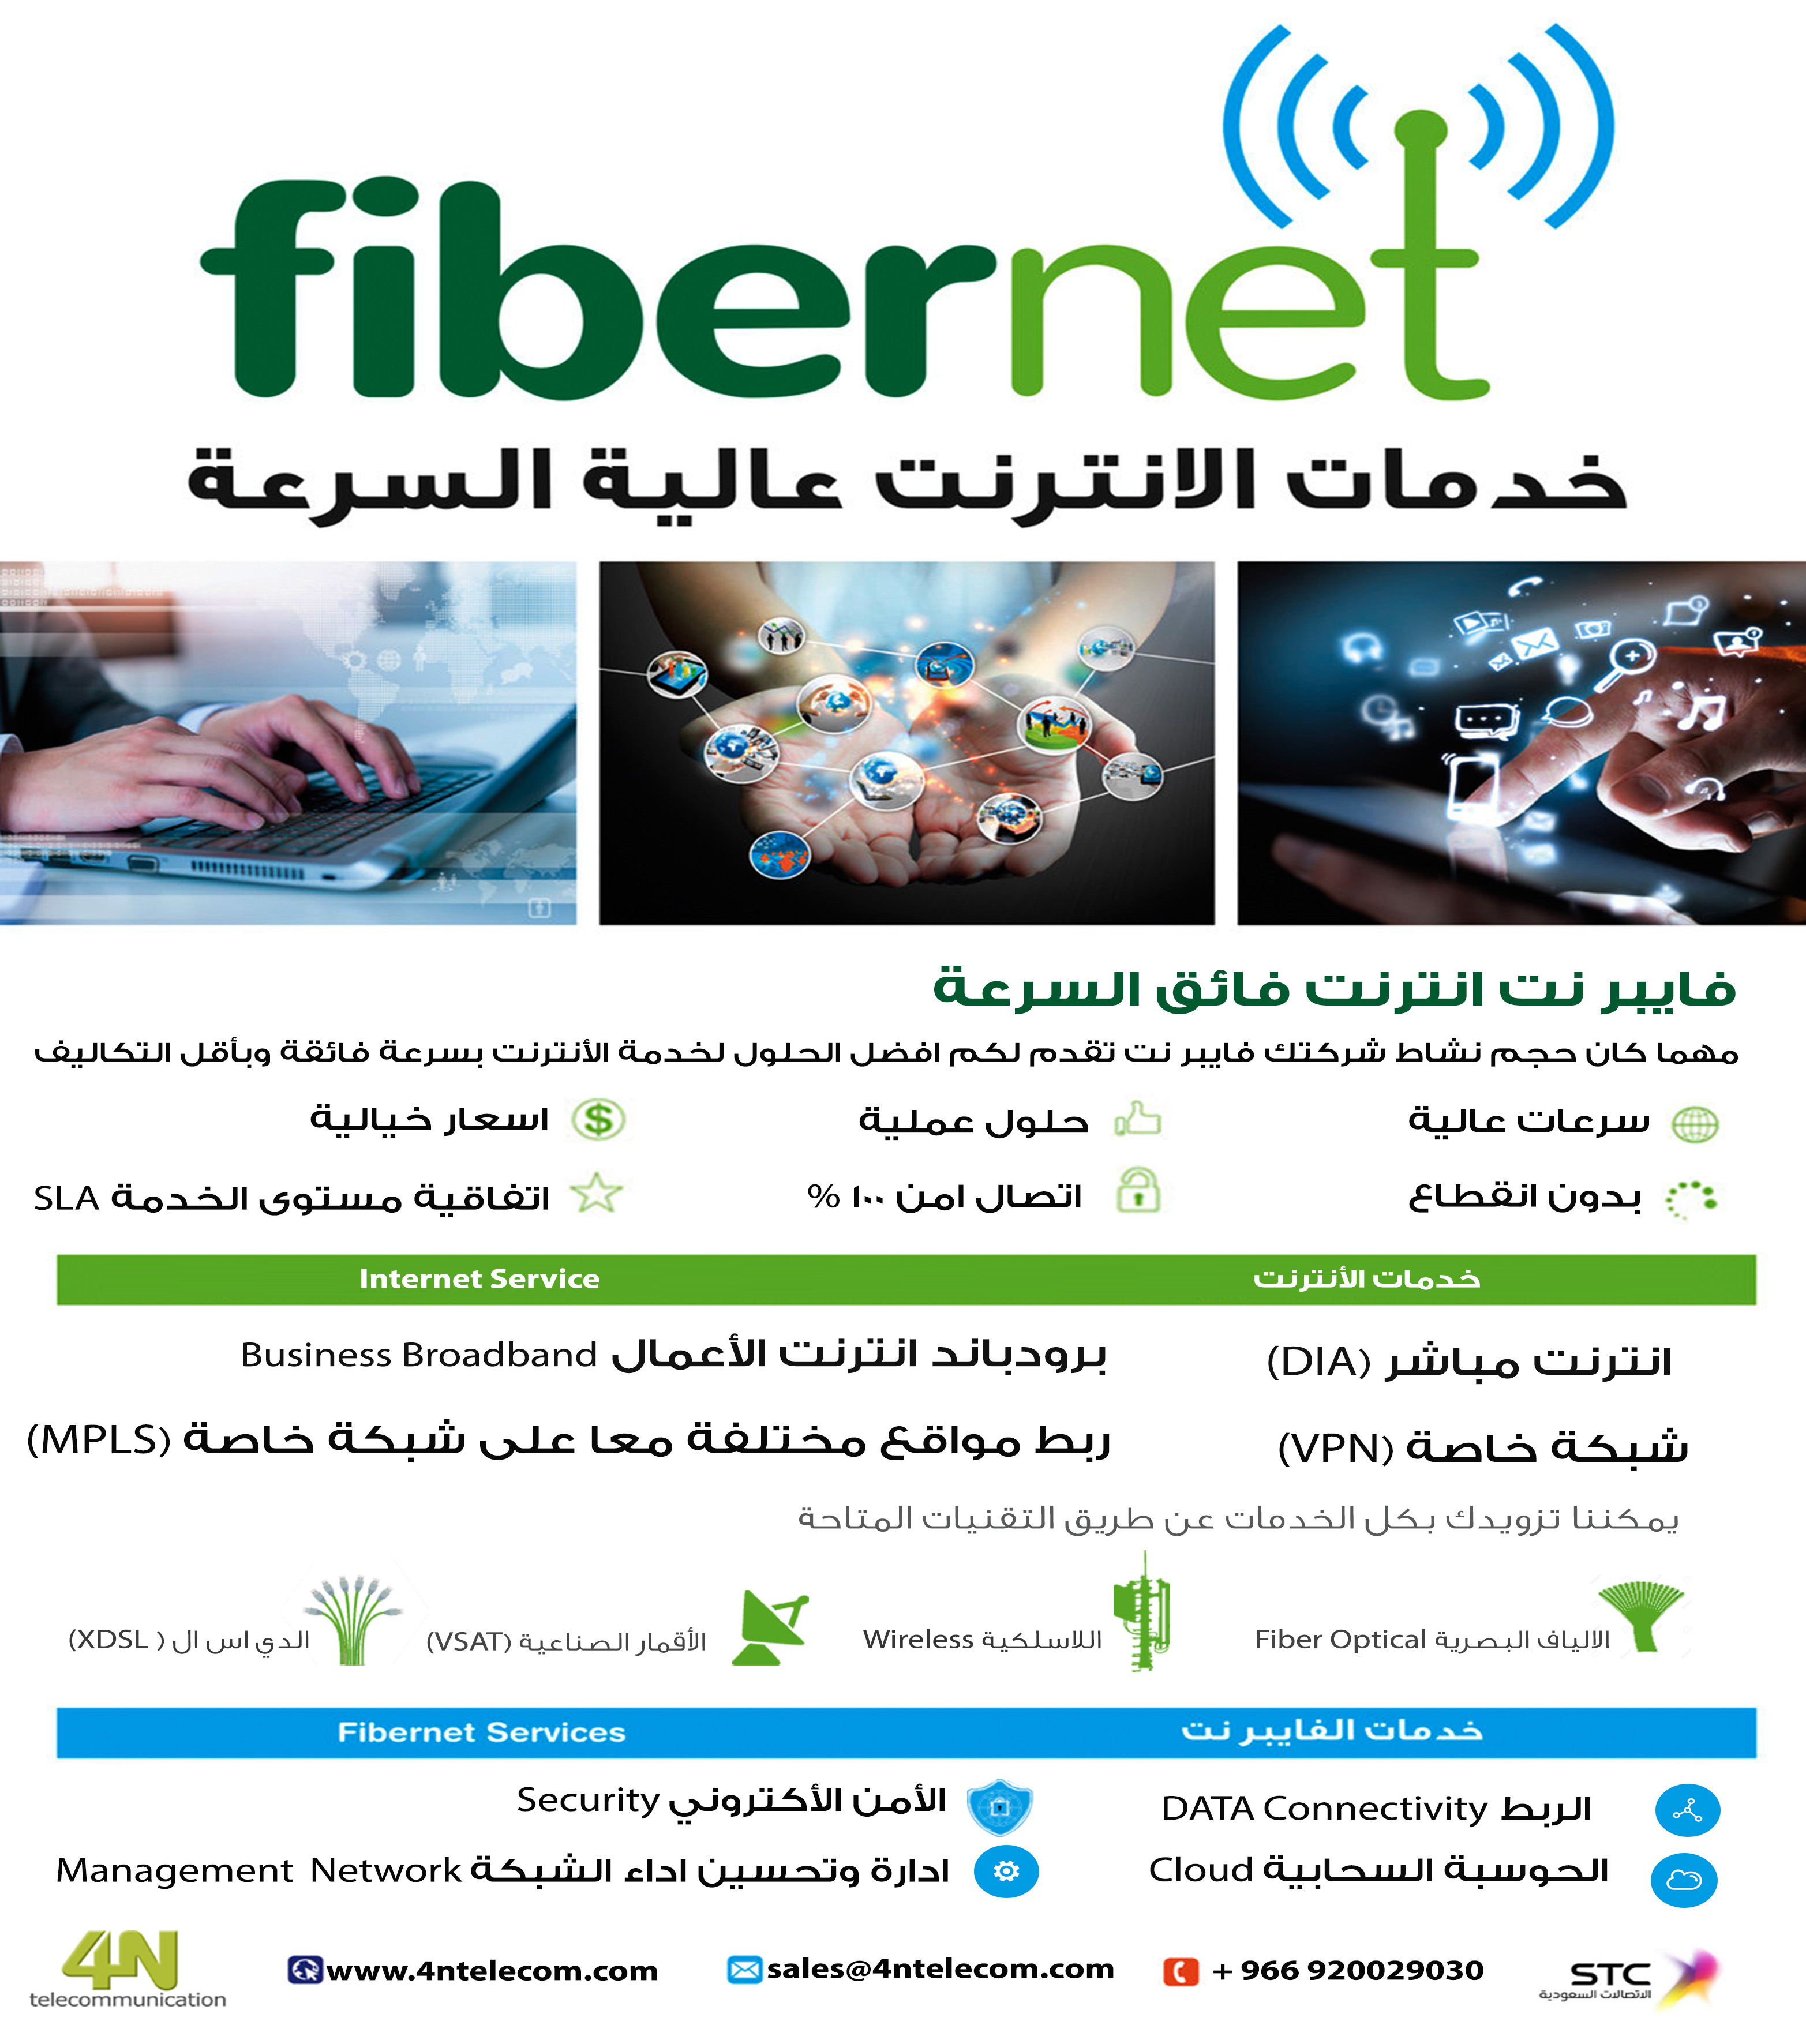 fibernet with STC Only Arabic 22 Image resolution